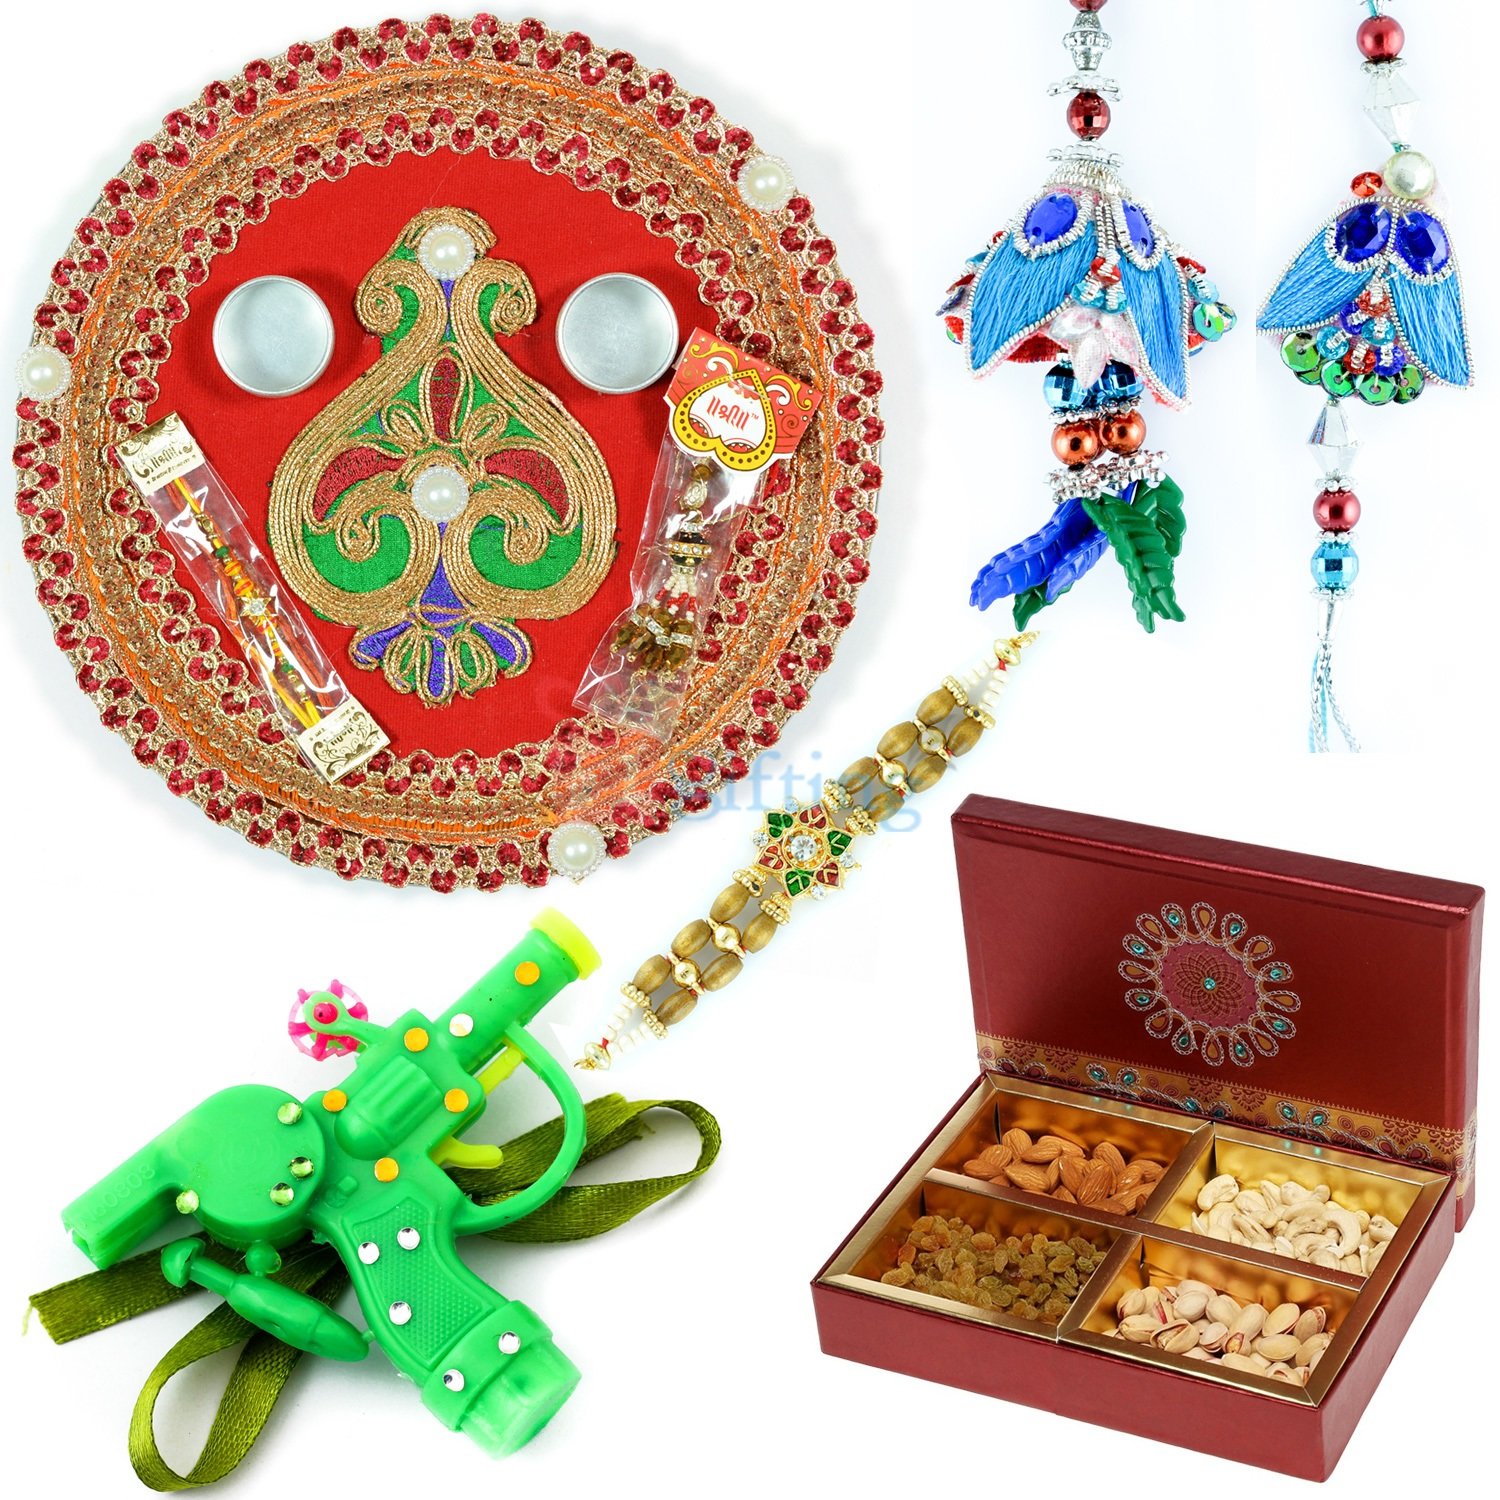 Dry Fruit Box with Thali and Sweets Combo along with Rakhis